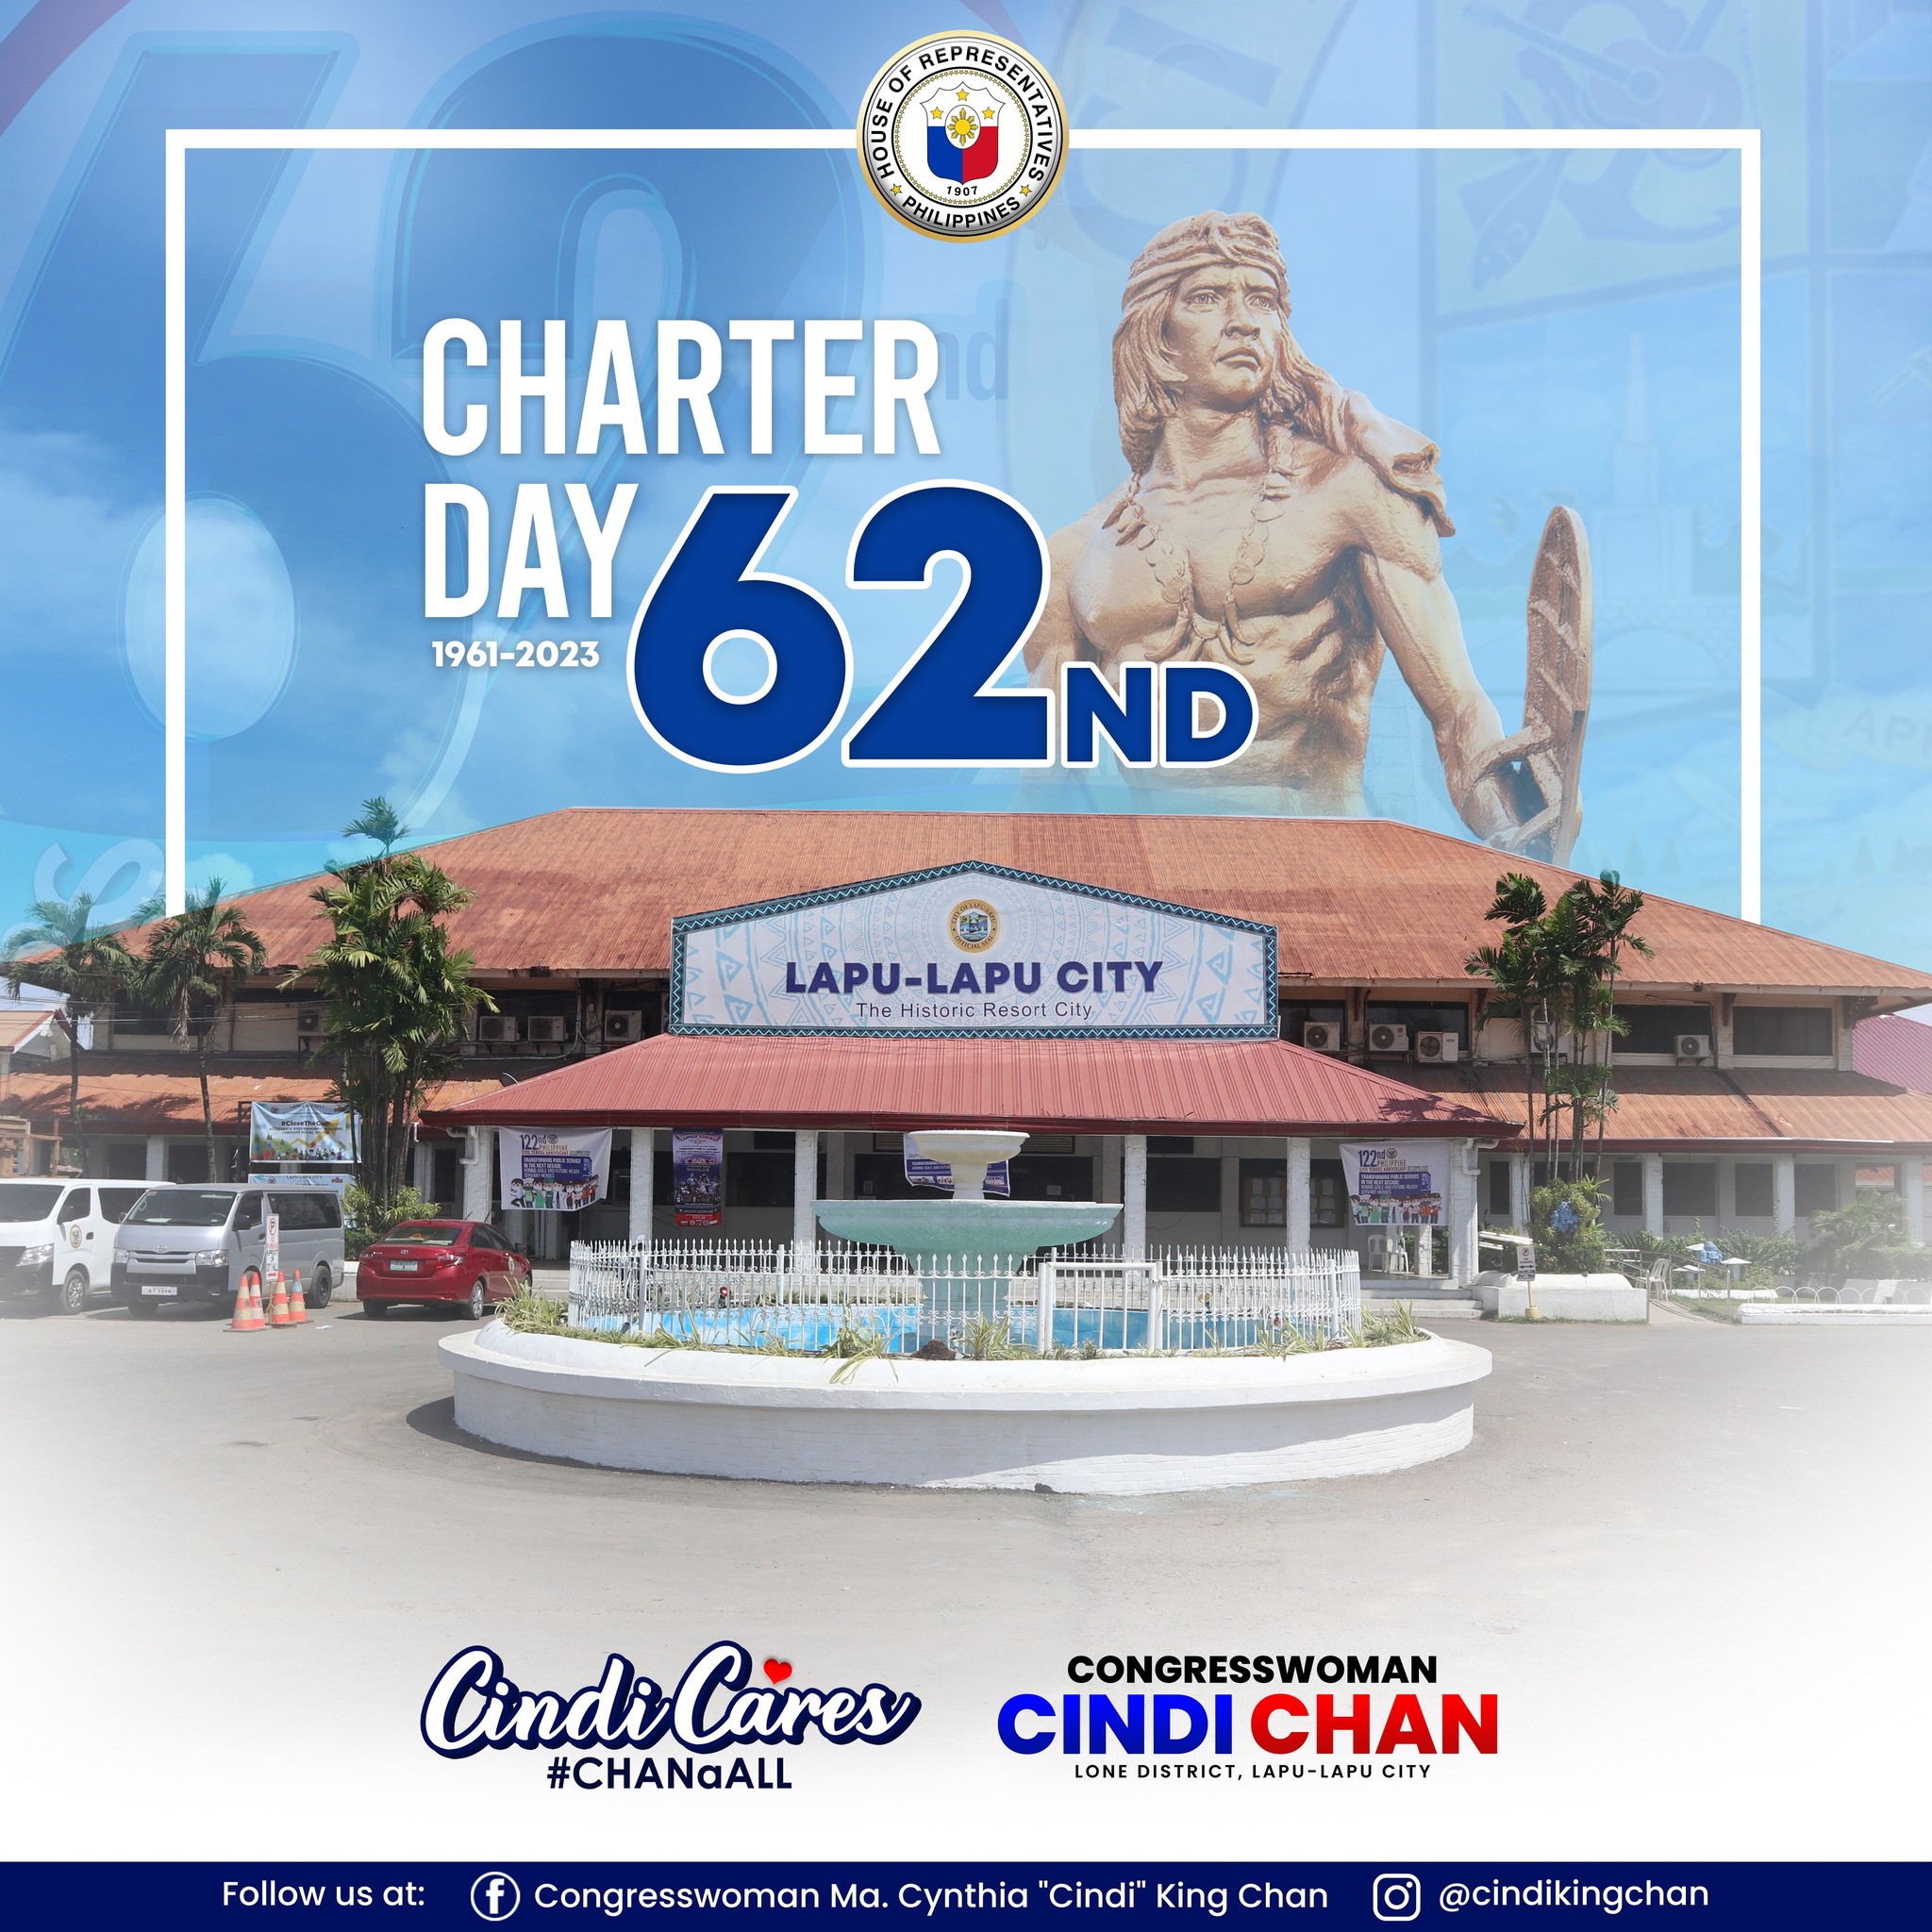 Image Posted for 62nd Charter Day